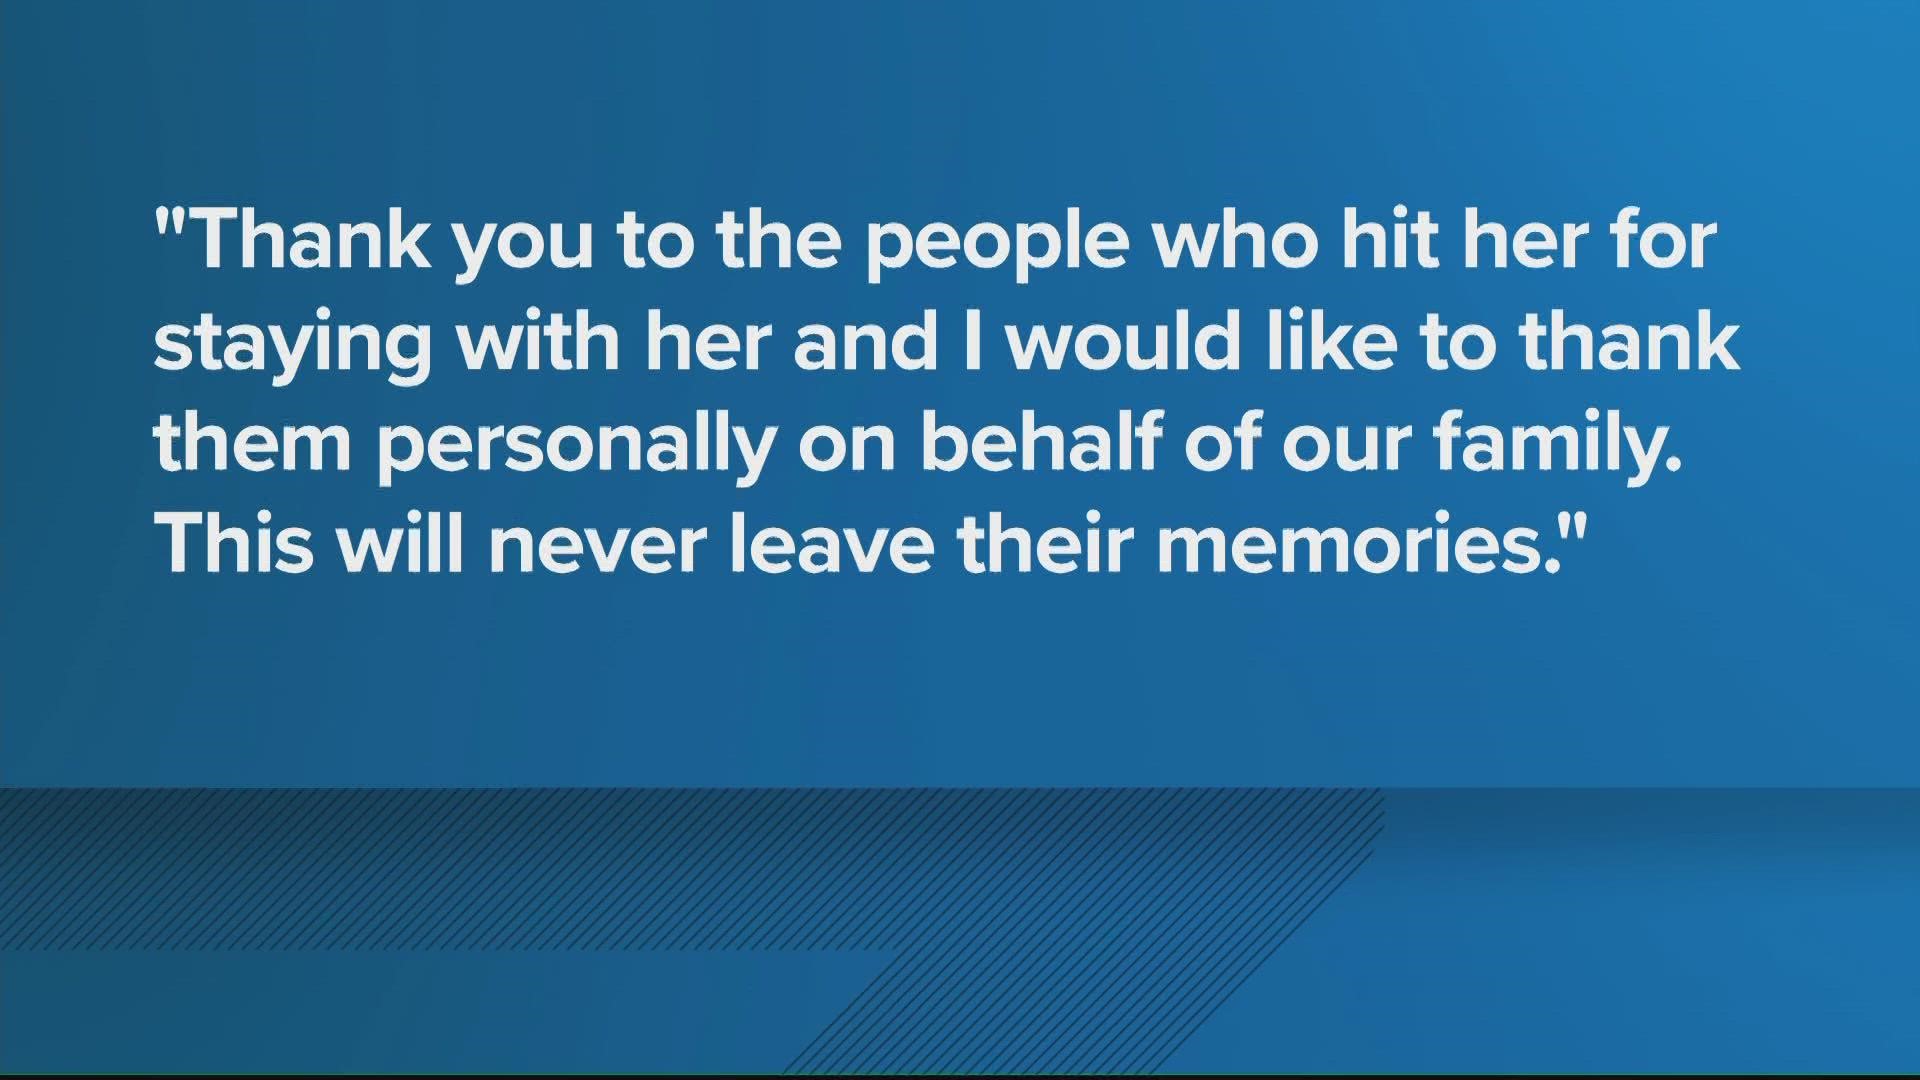 The woman was hit on the shoulder of I-10. Her father would like to thank the people that hit her for staying with her before her tragic death, he said.